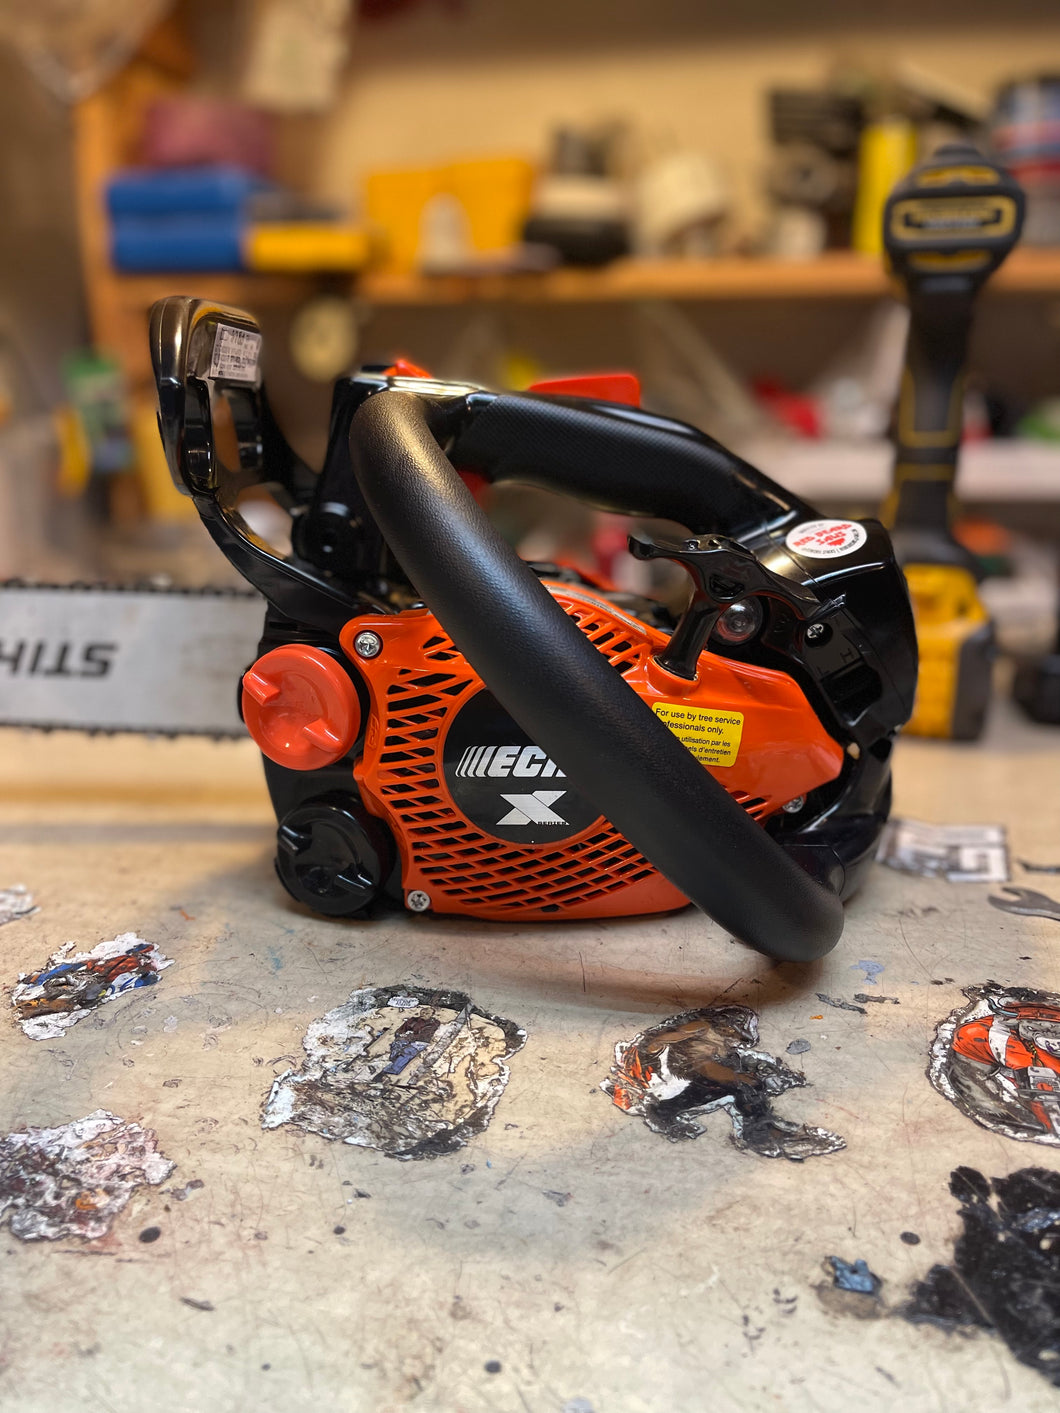 Echo CS-2511T Chainsaw Ported by Red Beard Saws